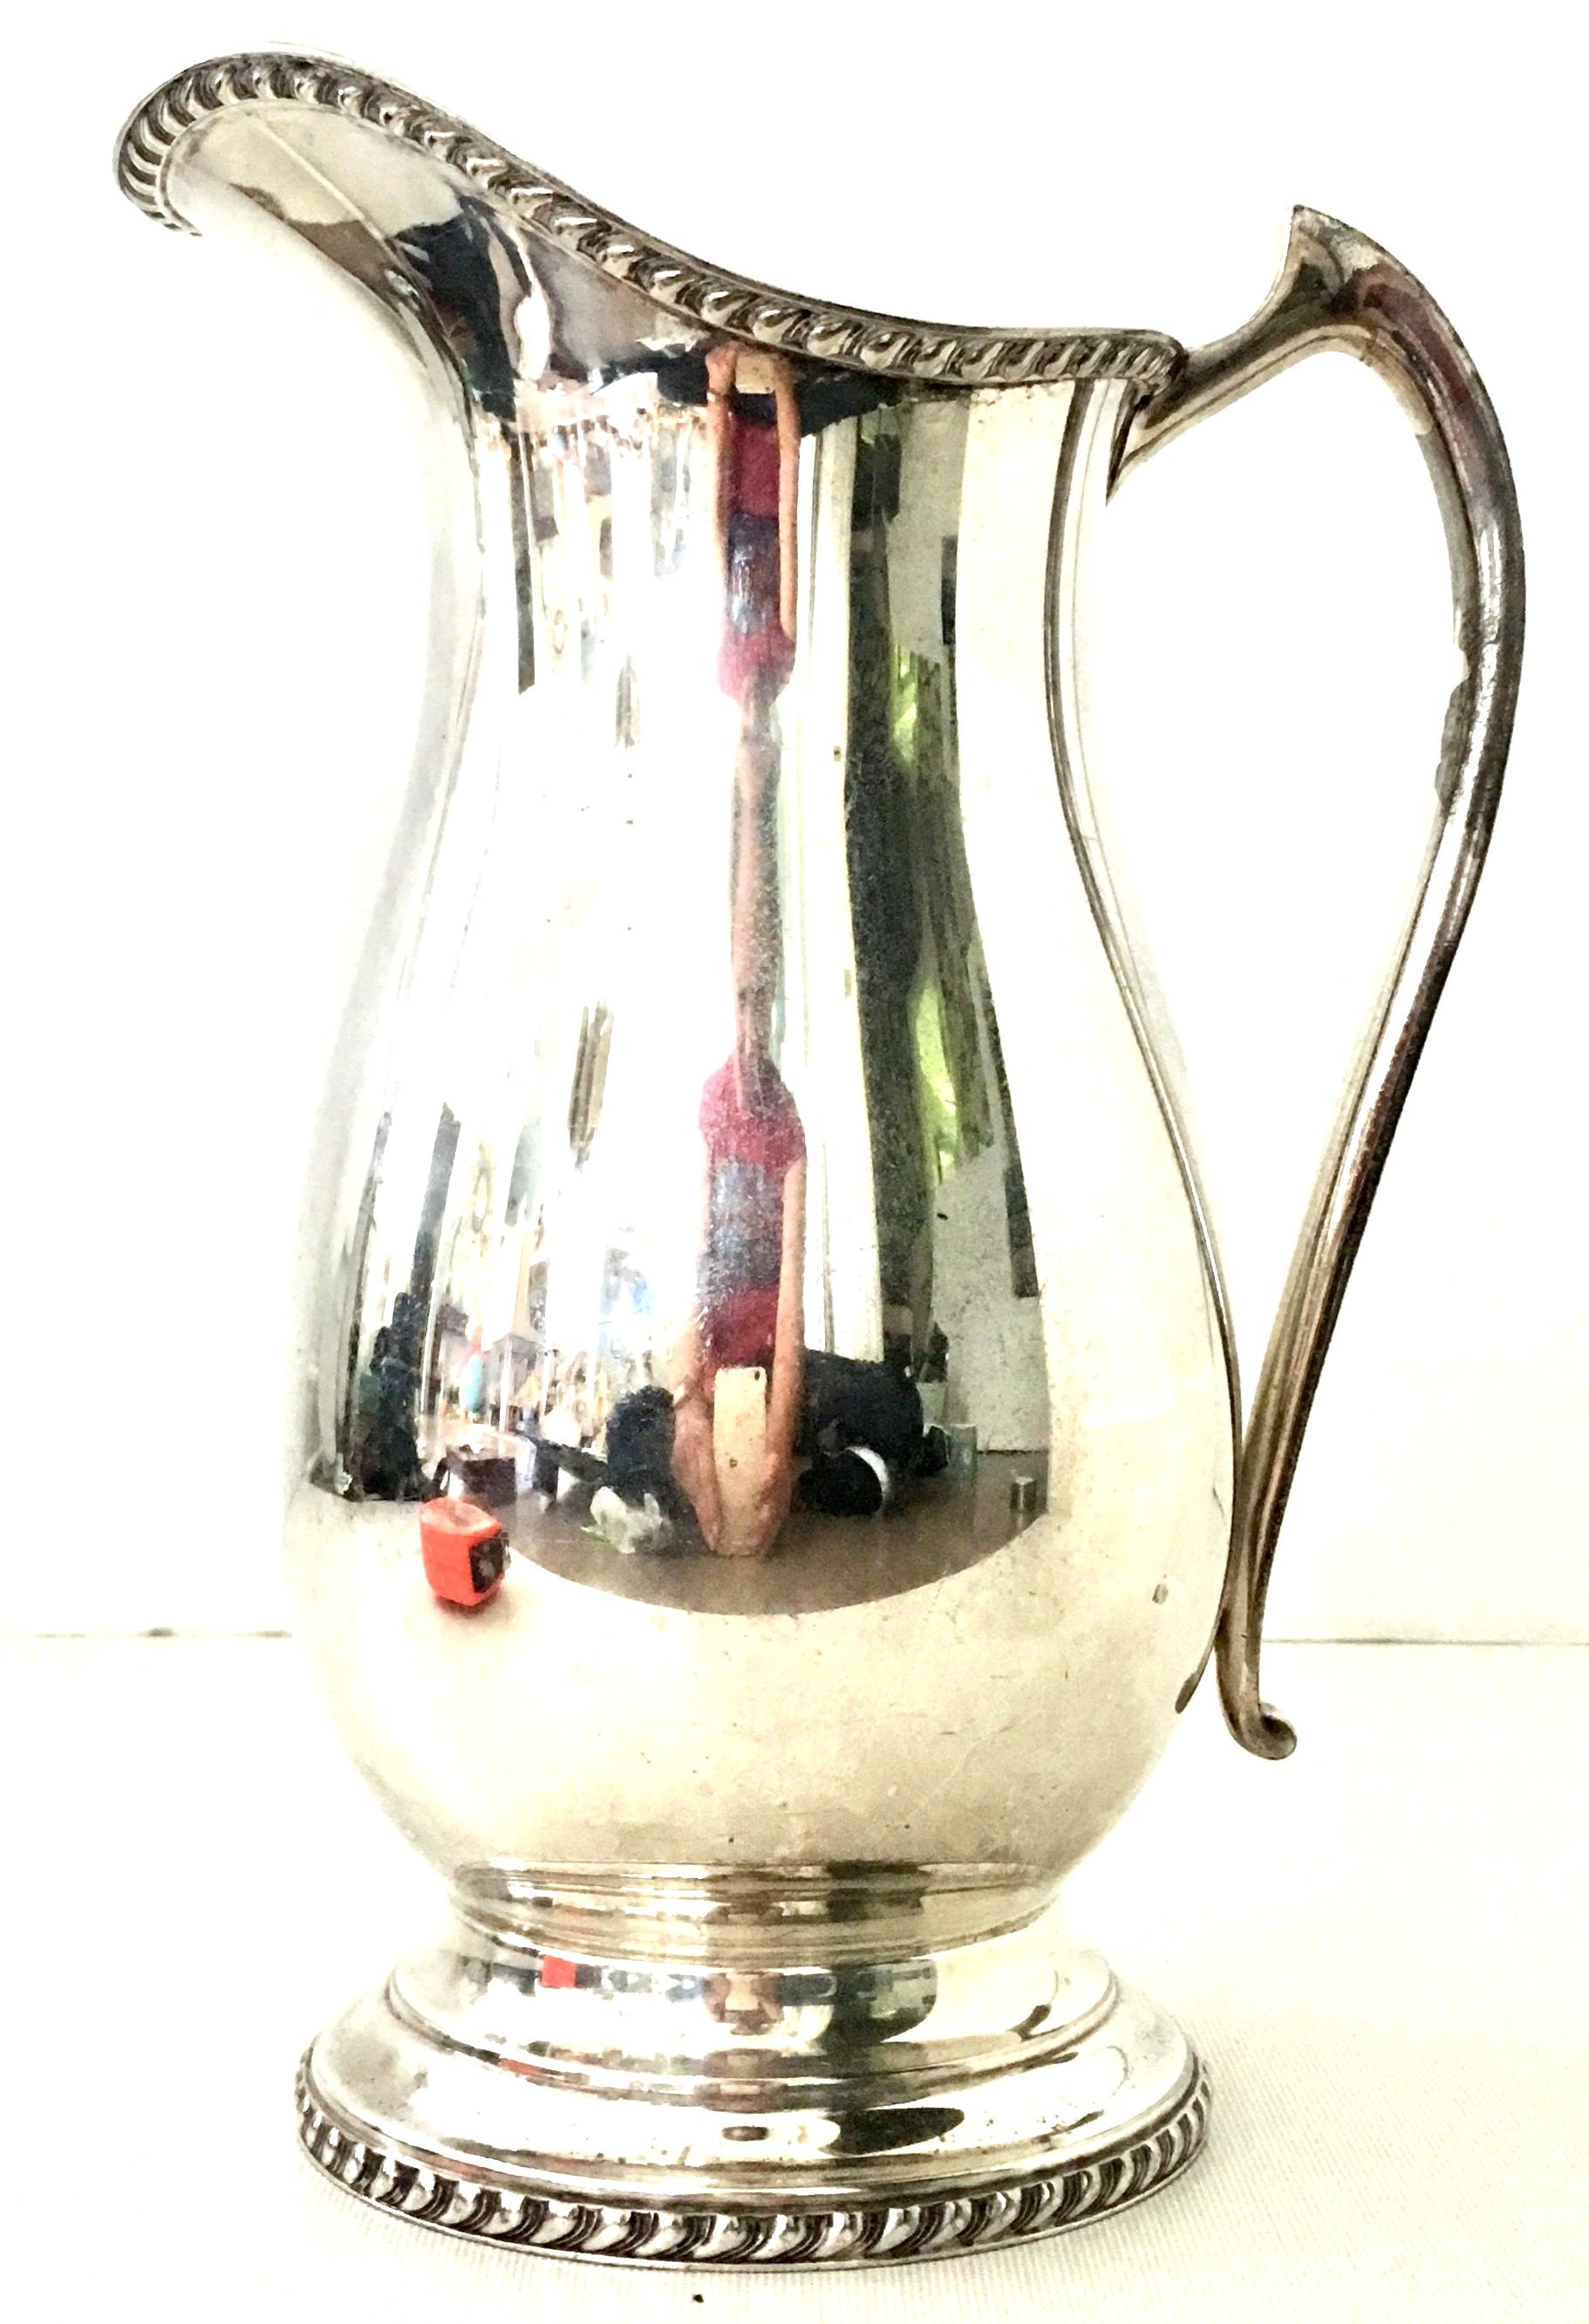 20th Century English silver plate beverage serving pitcher by, Bristol. Marked on the underside.